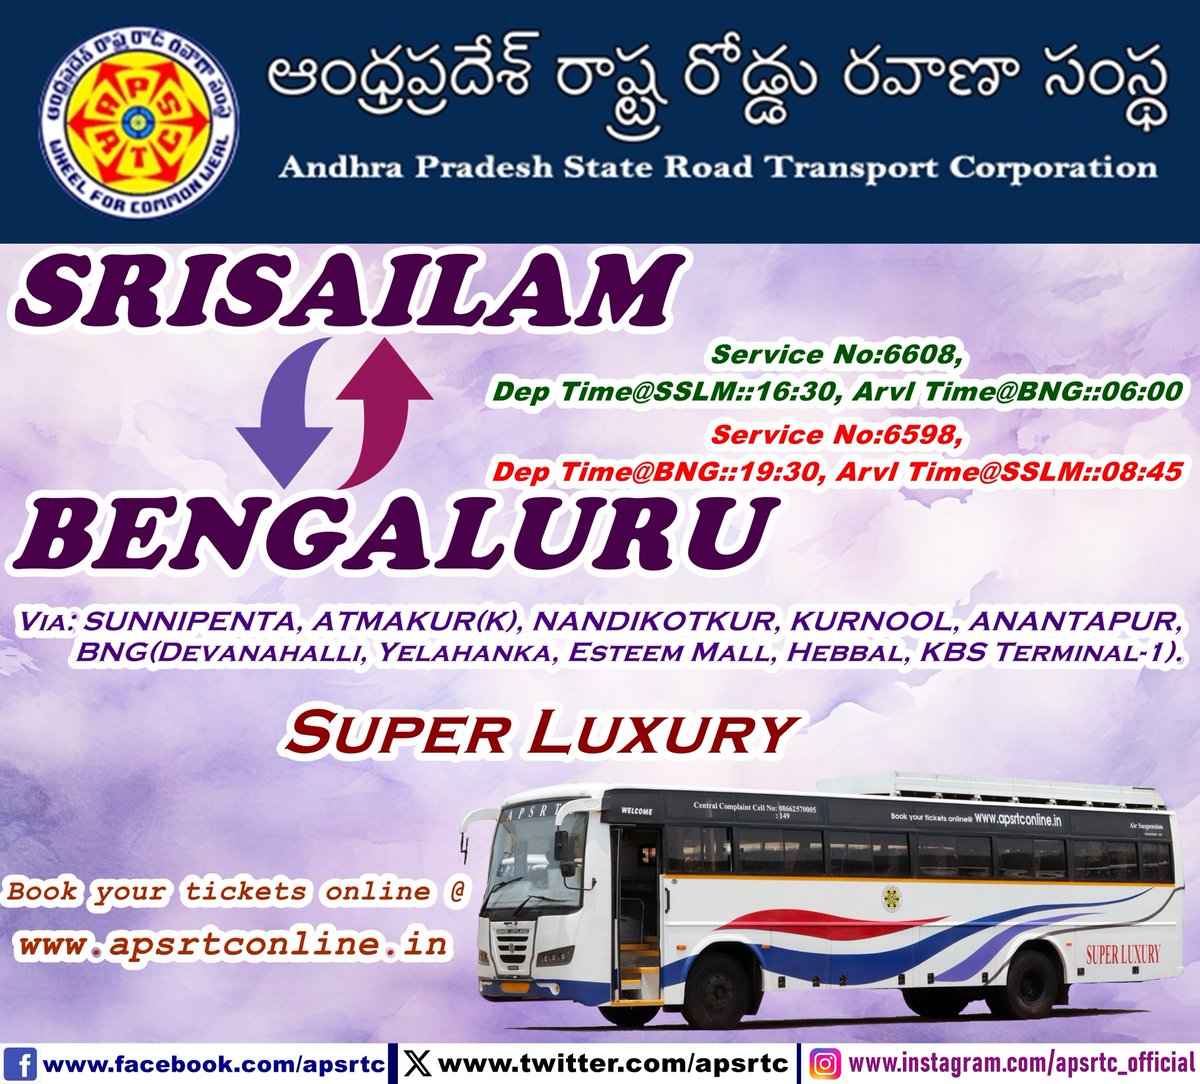 APSRTC is Operating Super Luxury Services for Srisailam - Bengaluru For Bookings Please Visit apsrtconline.in